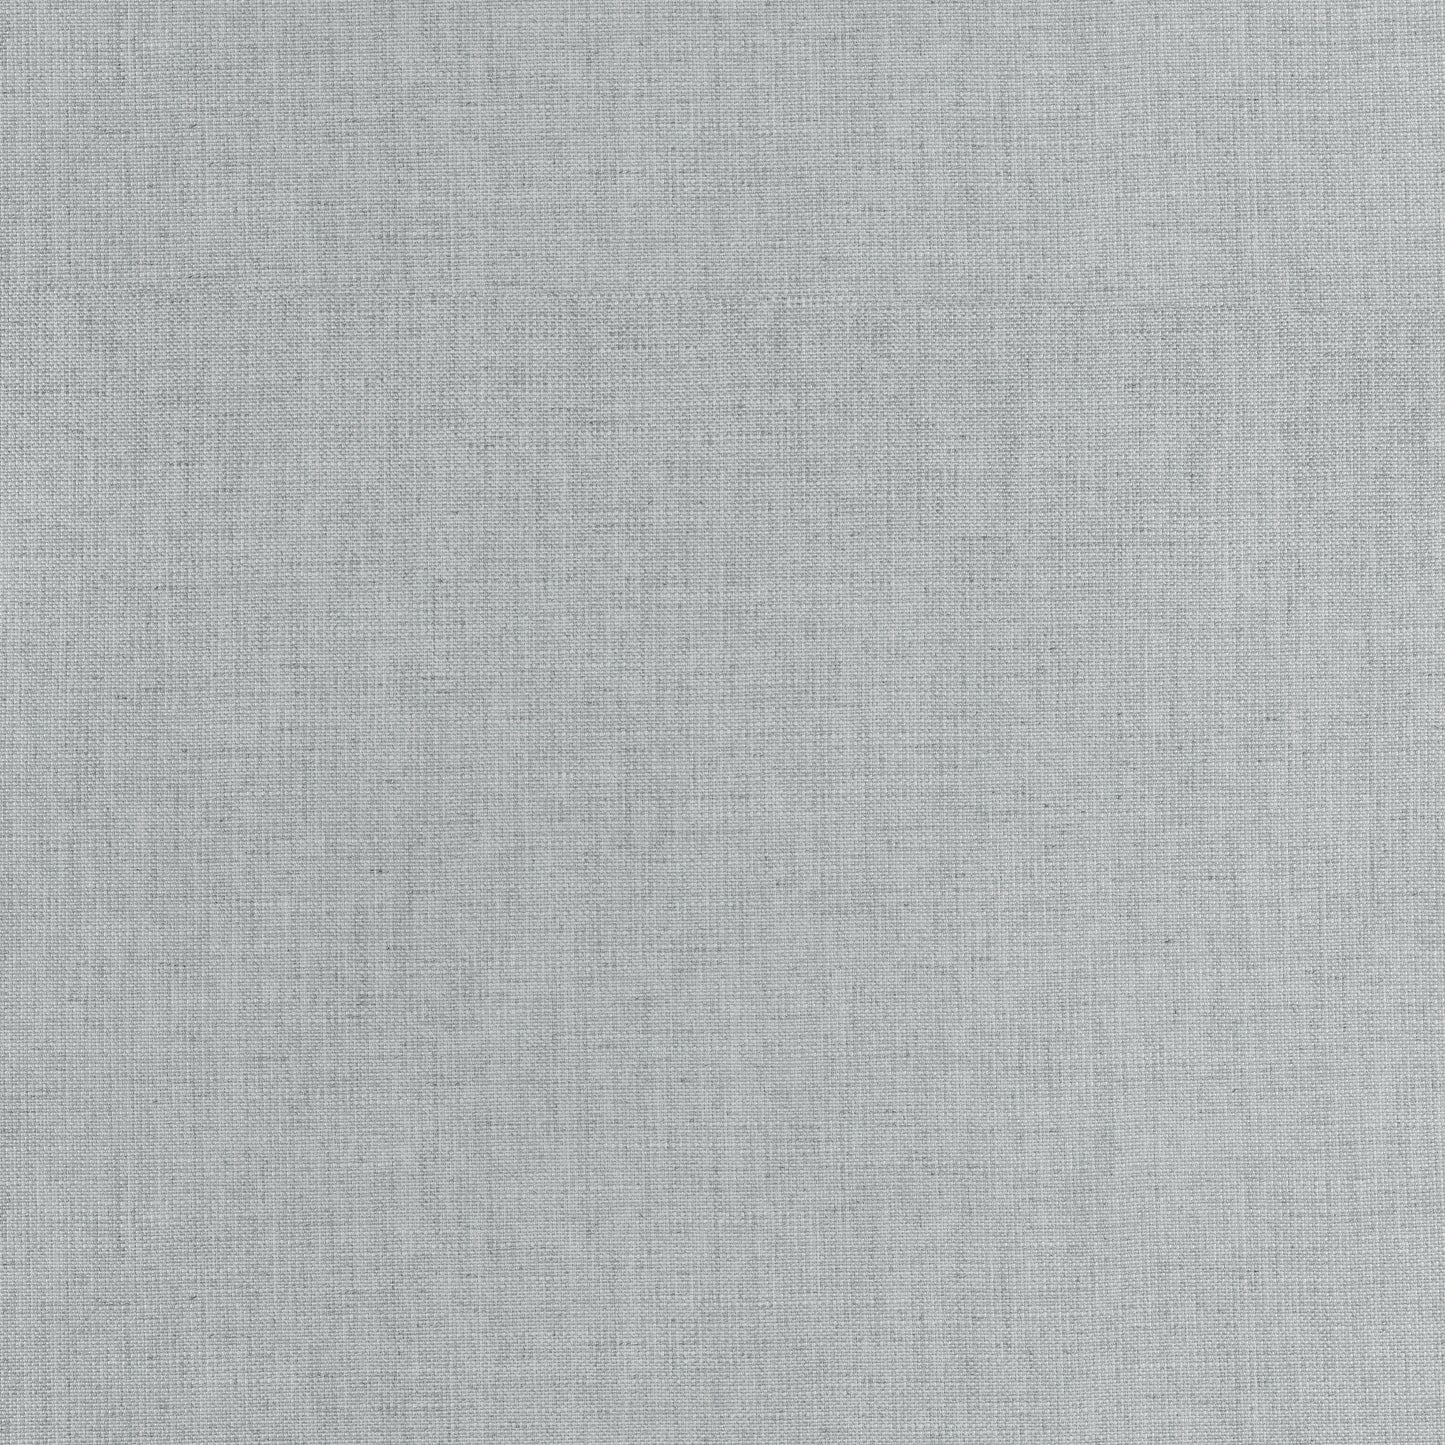 Purchase Thibaut Fabric SKU W75204 pattern name Ambient color Slate